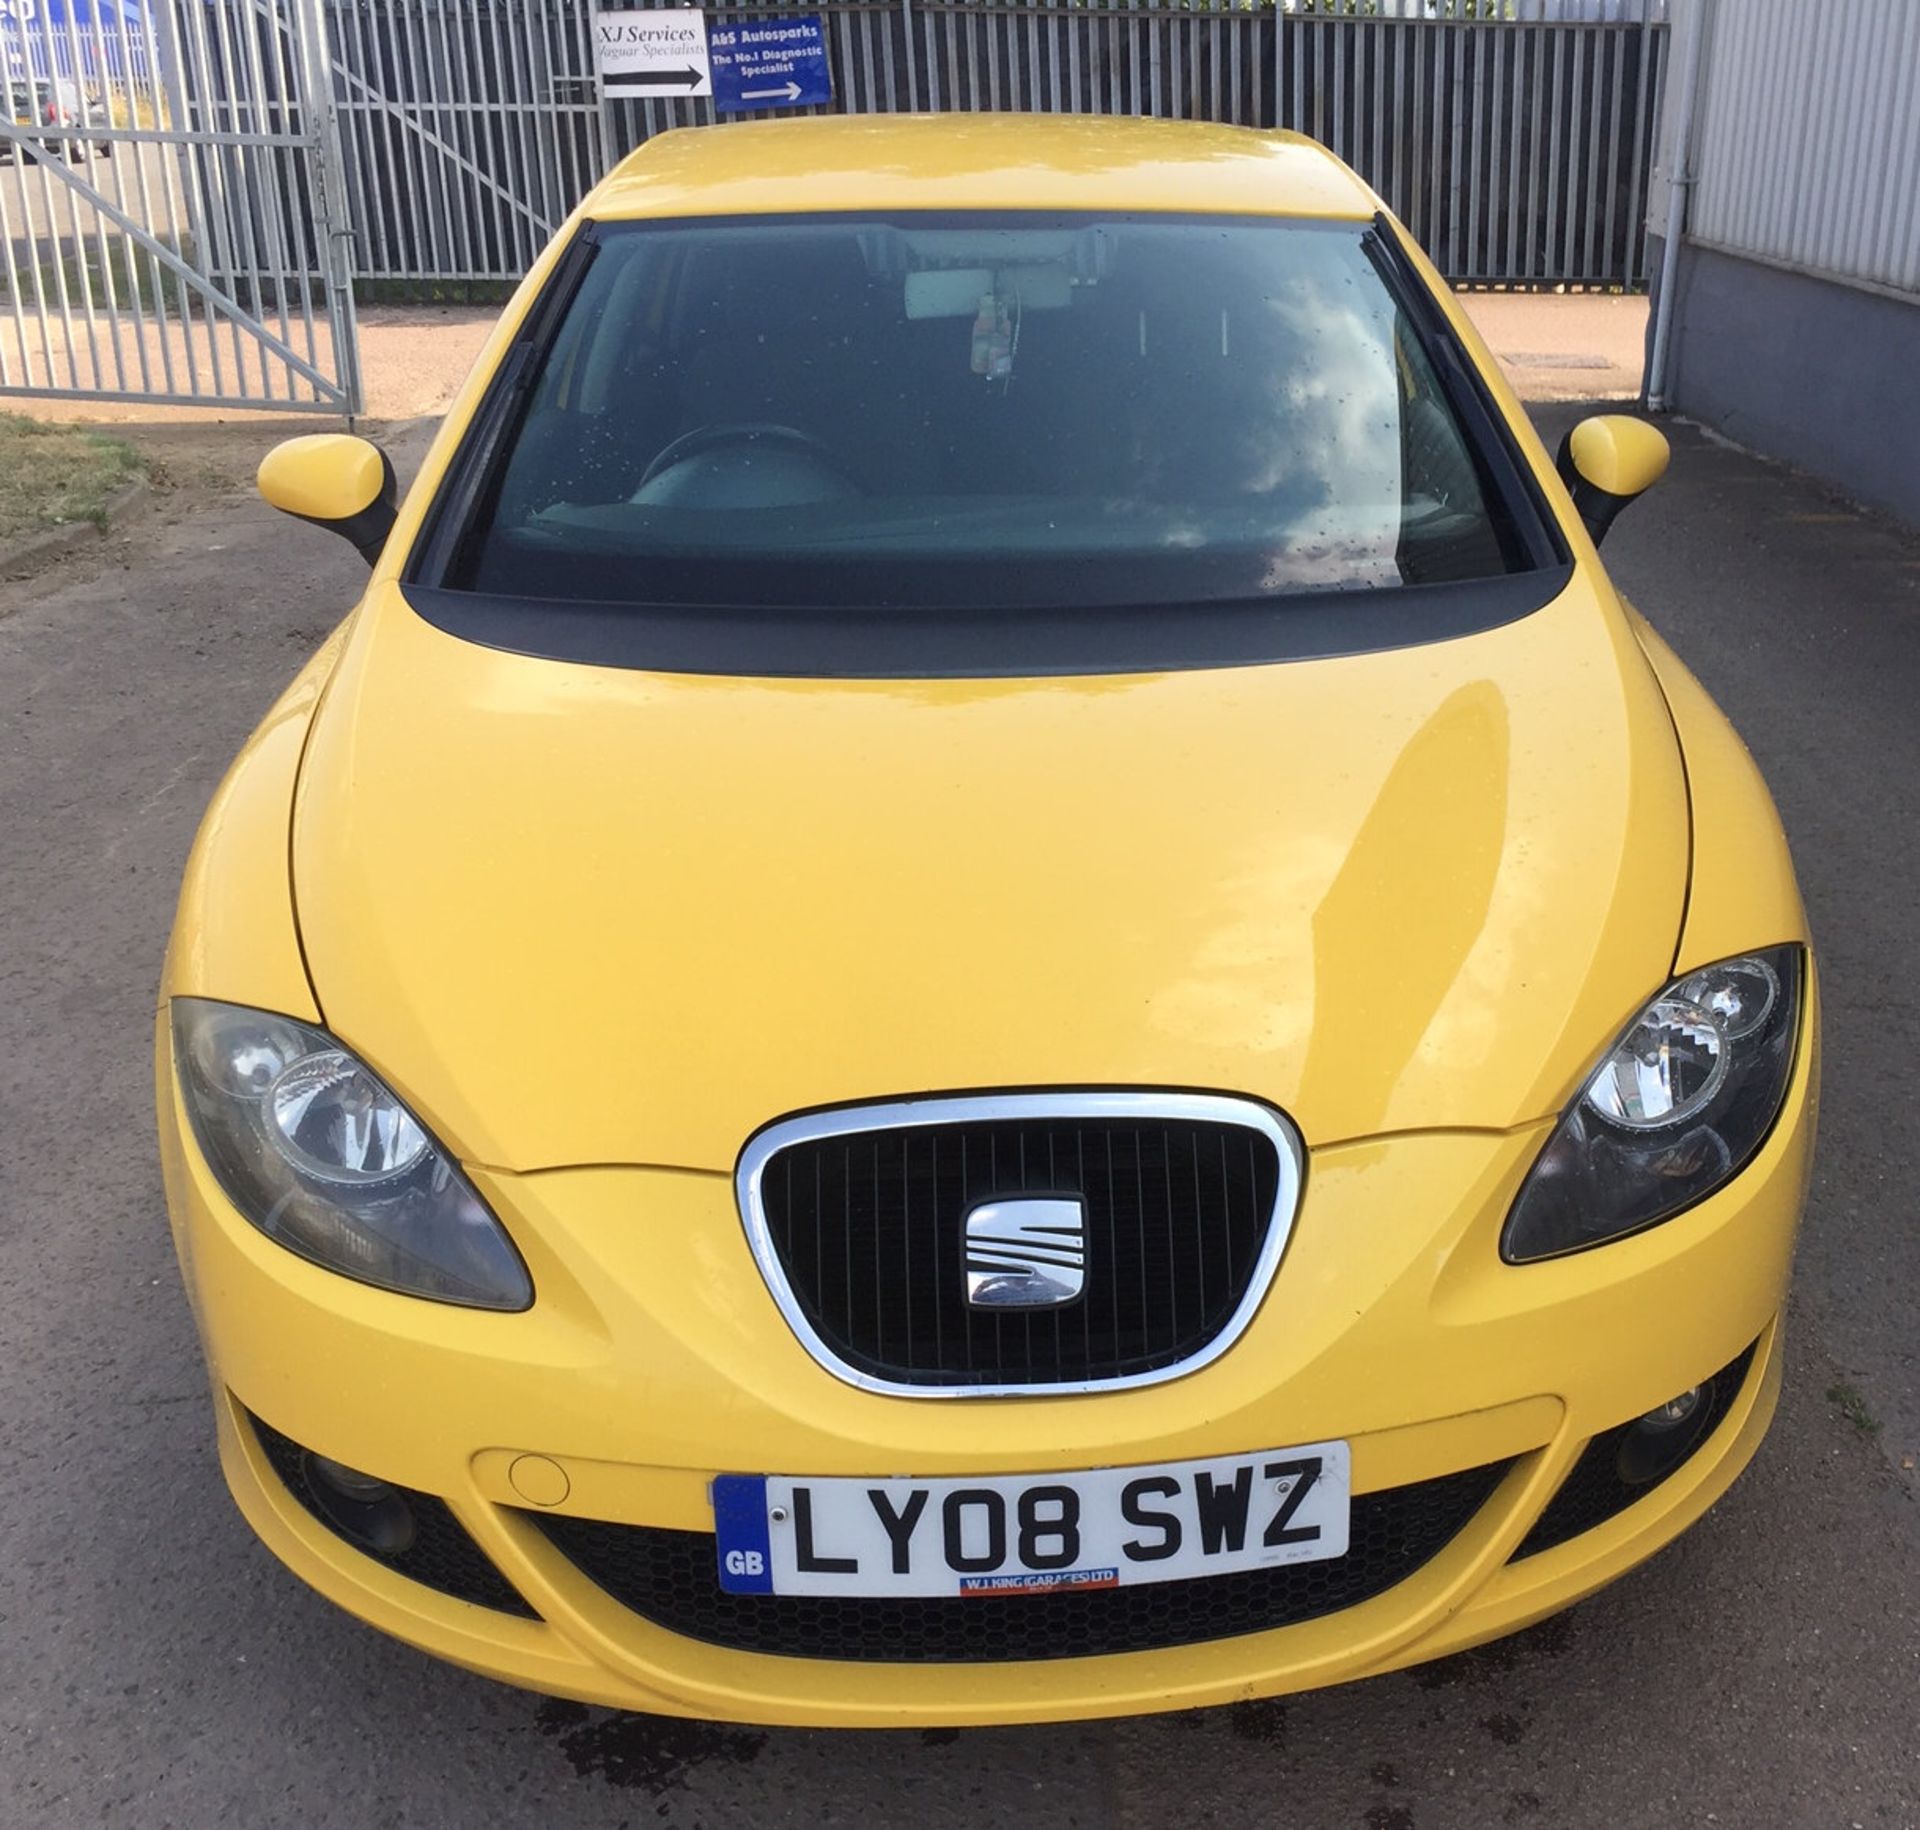 2008 Seat Leon 2.0 TDI Stylance 5 Door Hatchback - CL505 - NO VAT ON THE HAMMER - Location: Corby, - Image 7 of 13